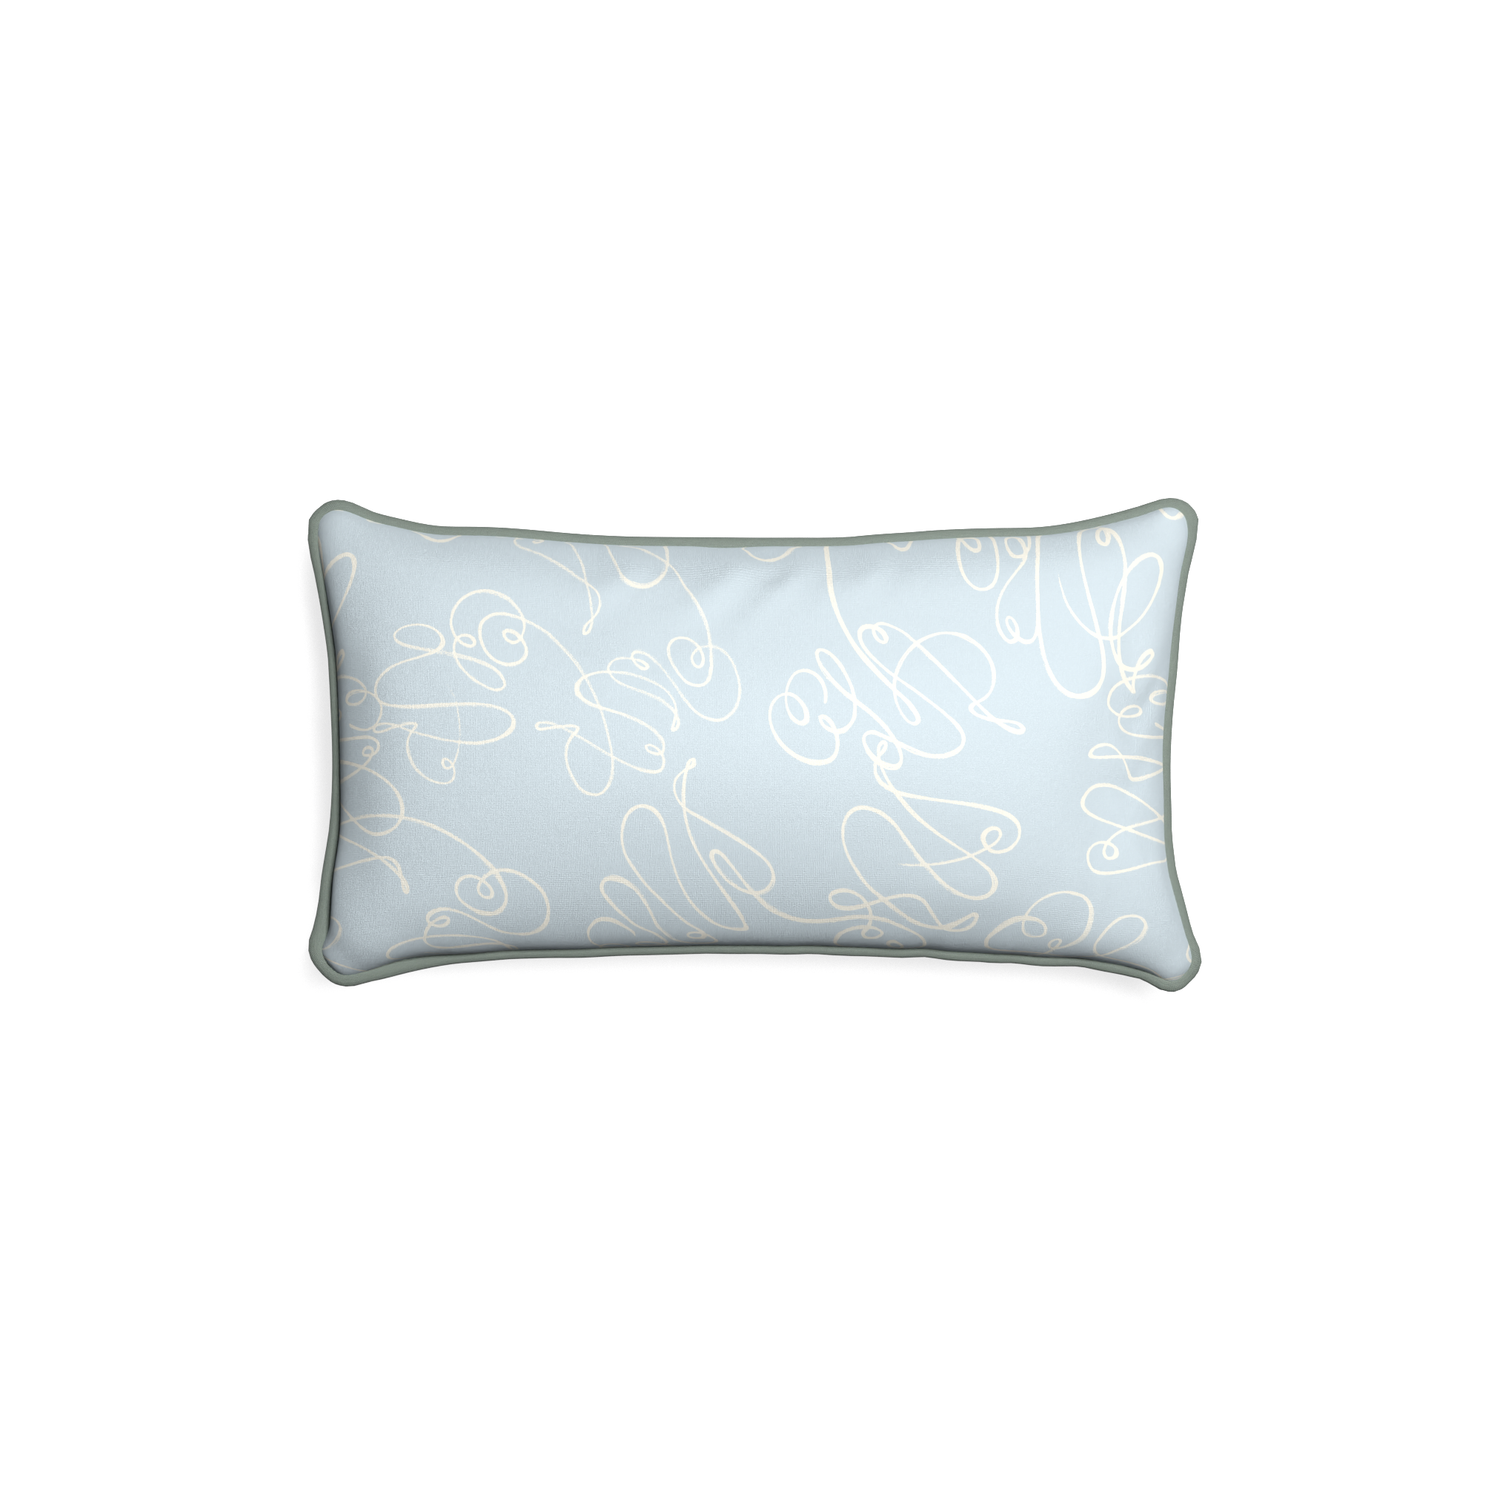 Petite-lumbar mirabella custom powder blue abstractpillow with sage piping on white background